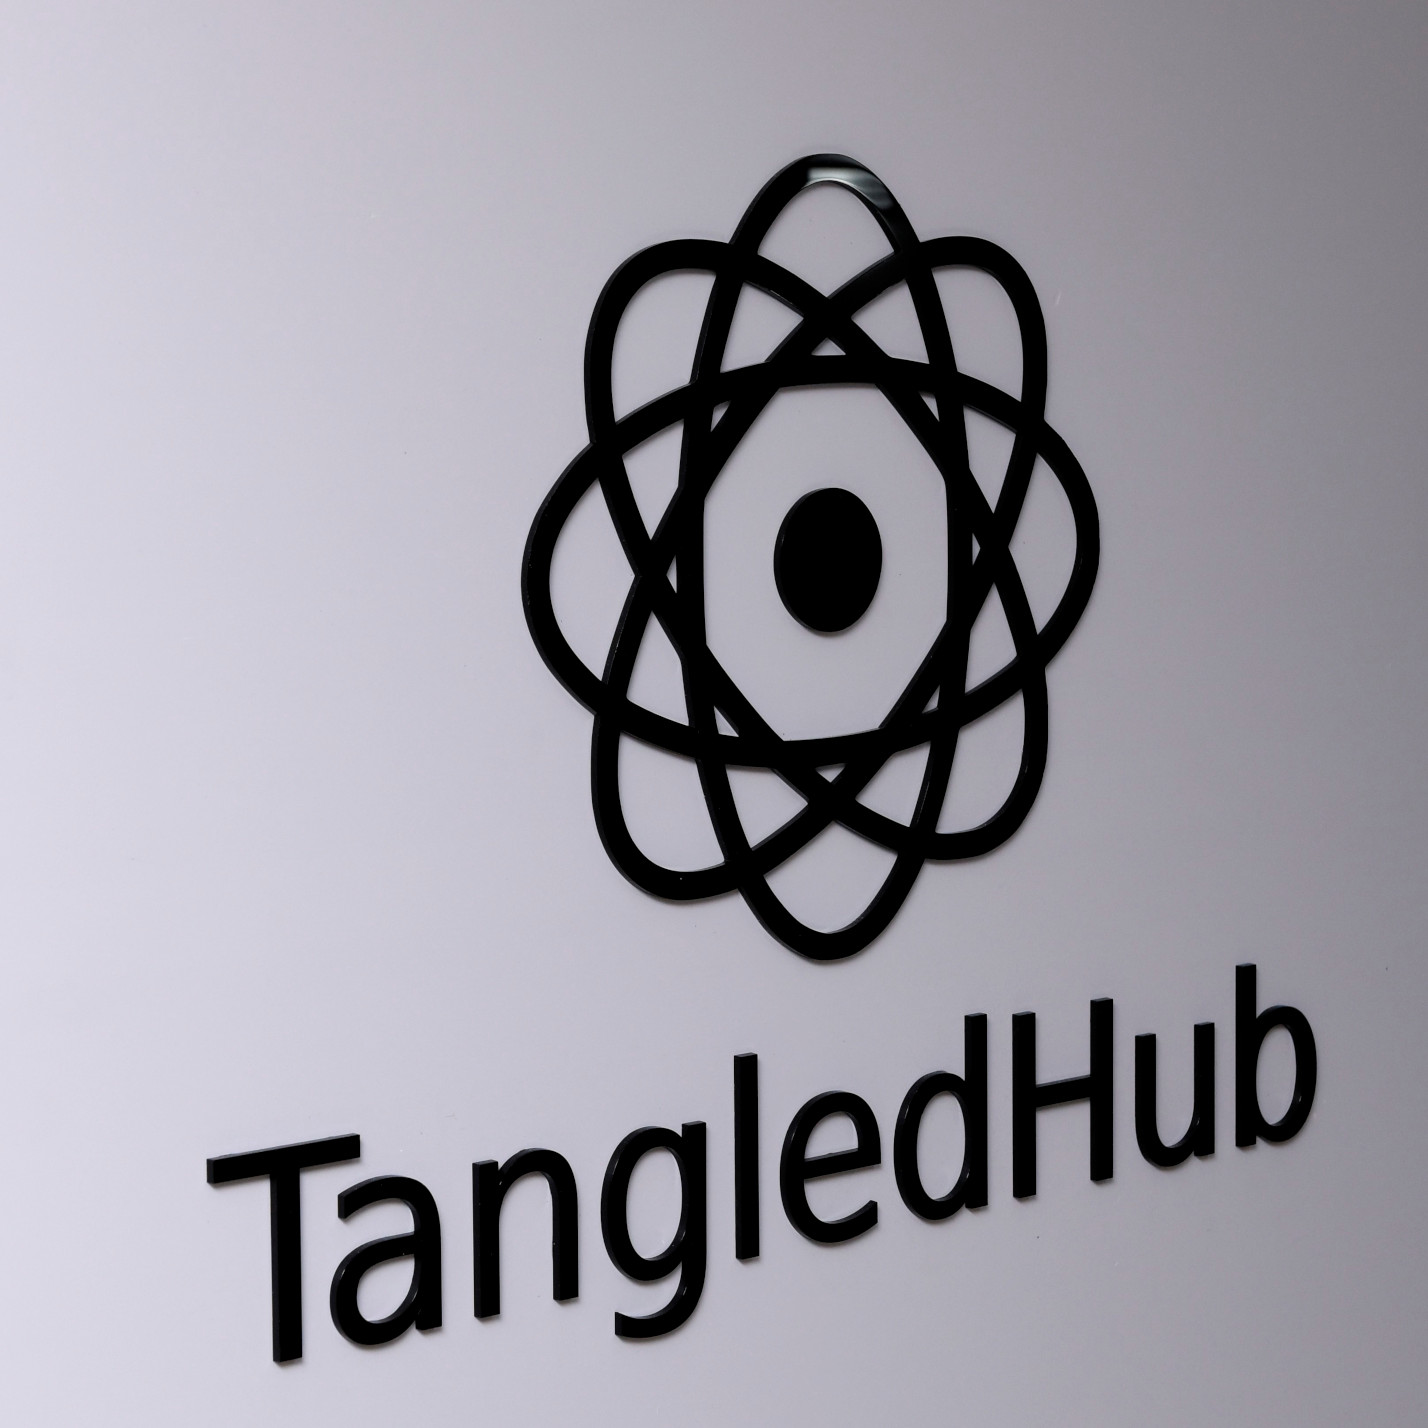 211231_tangledhub_open_source_libraries